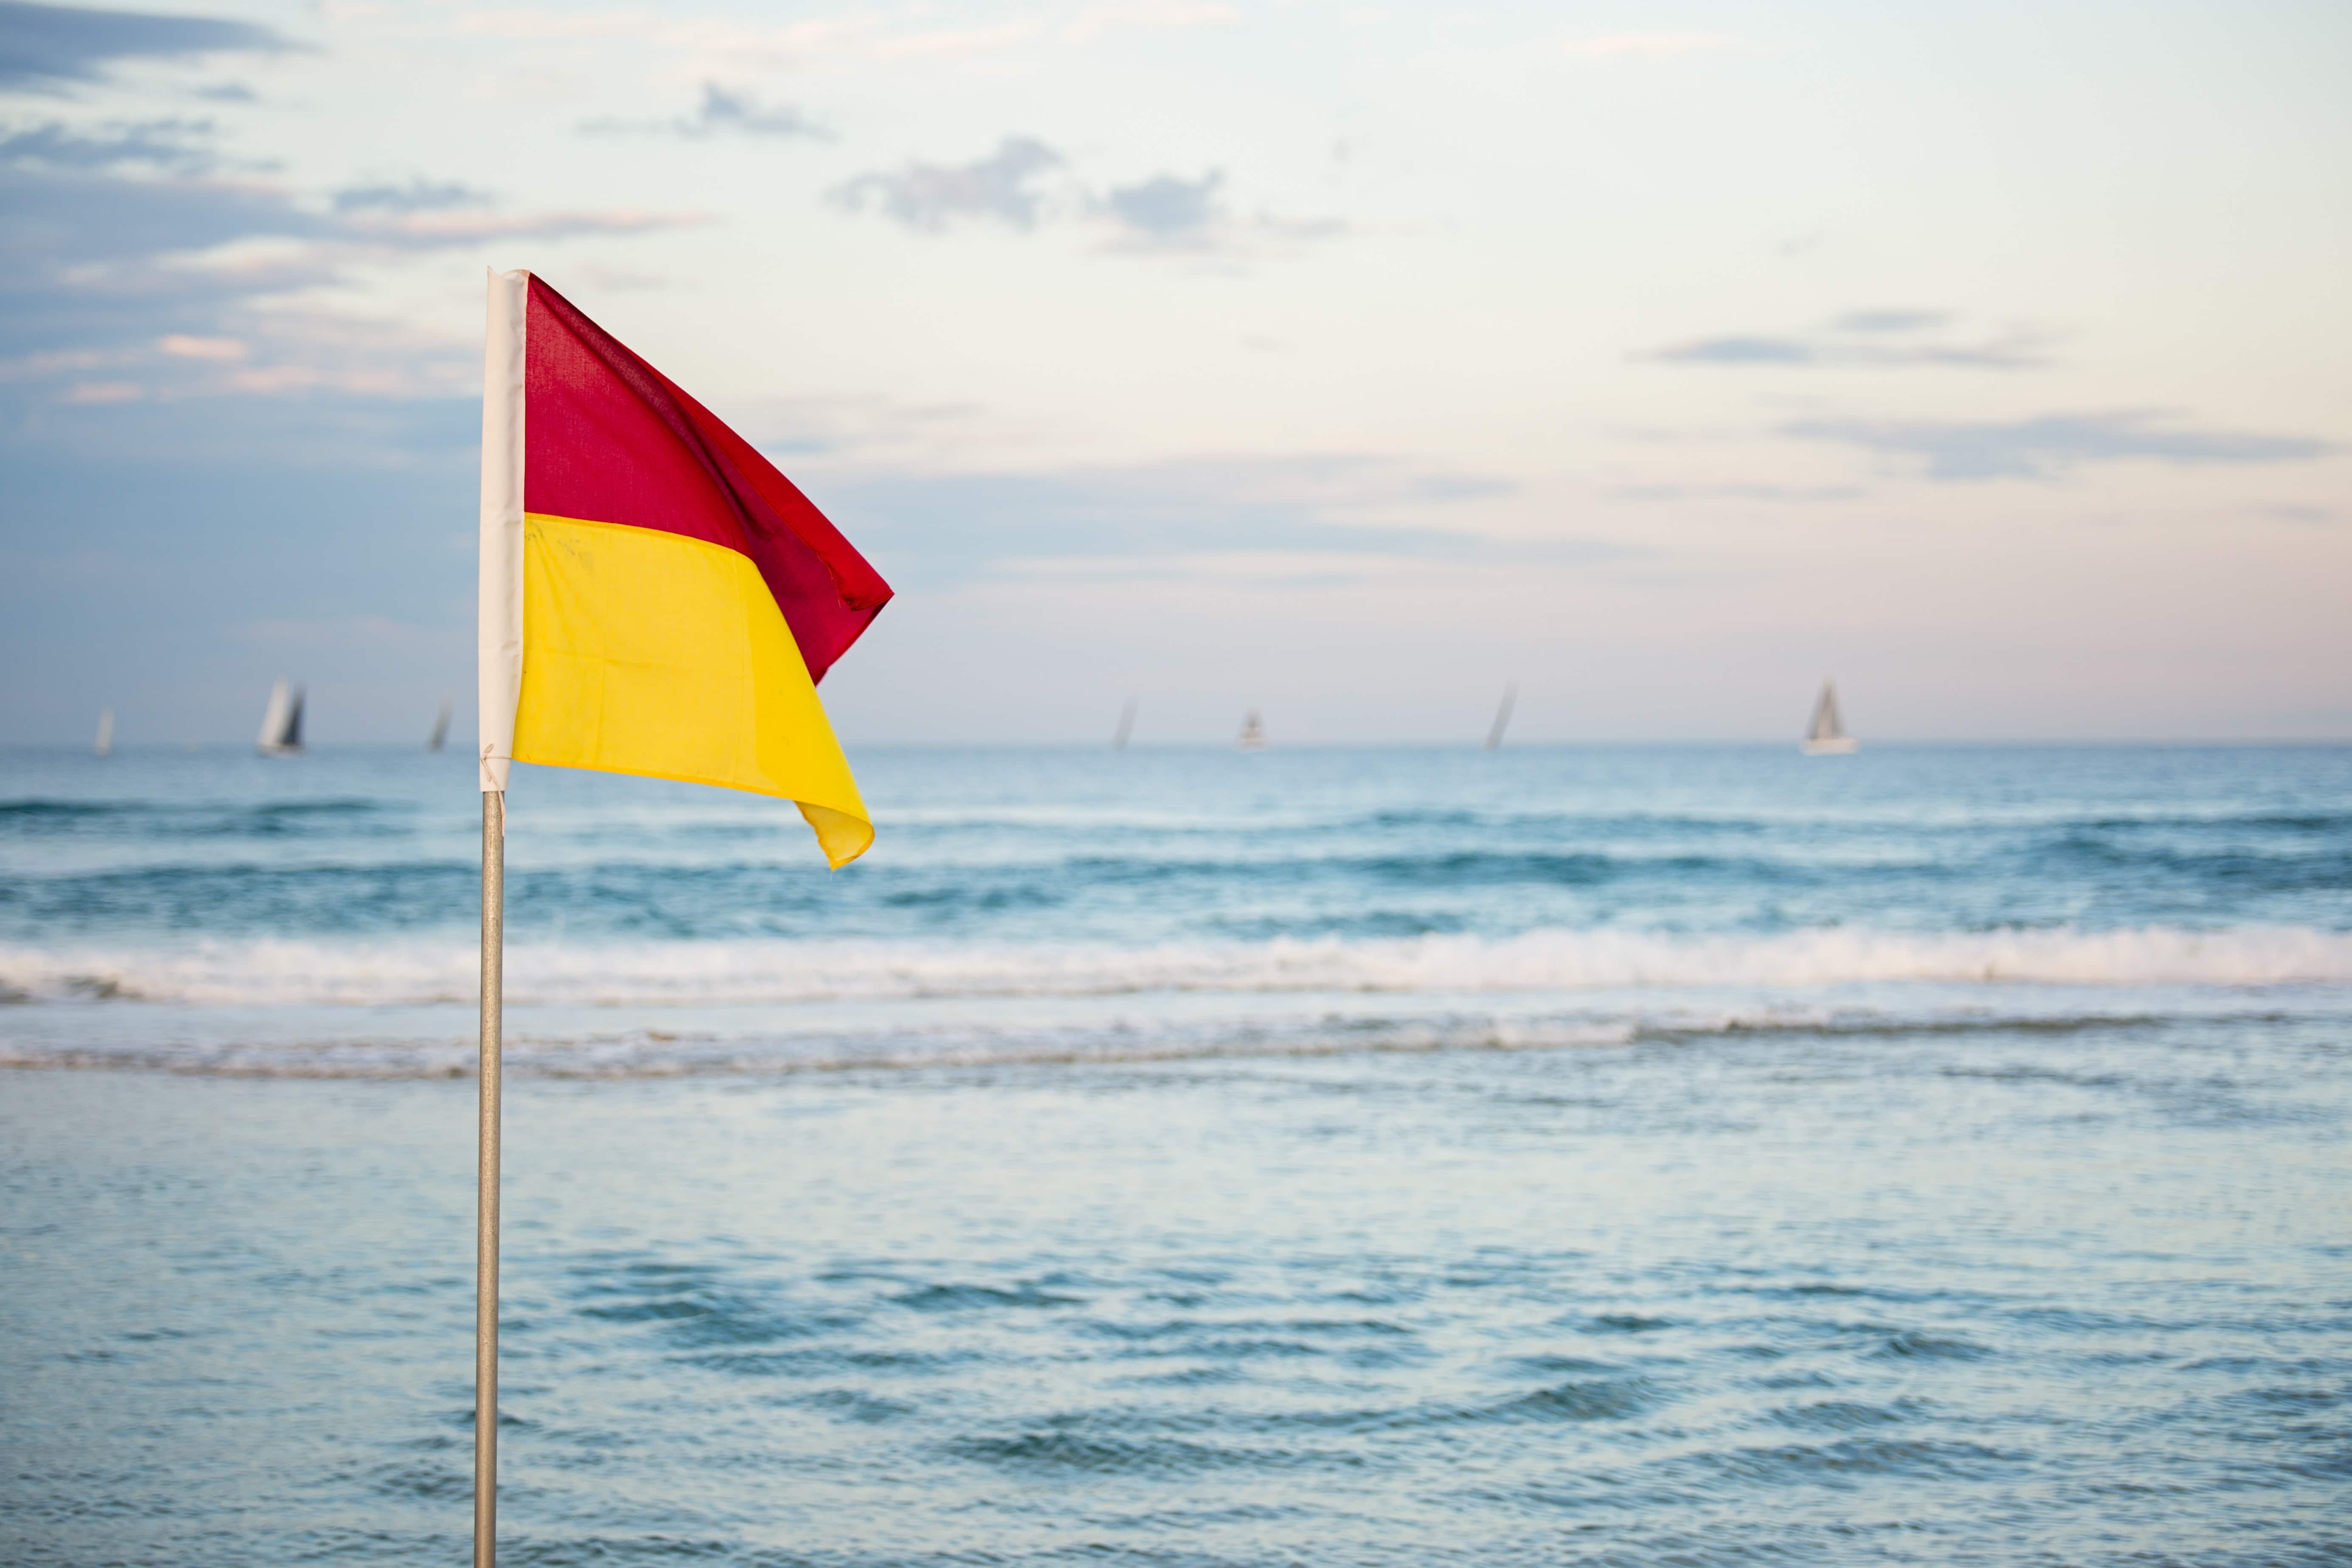 Red and yellow flag on a beach - yachts and sale boats in the background at dusk